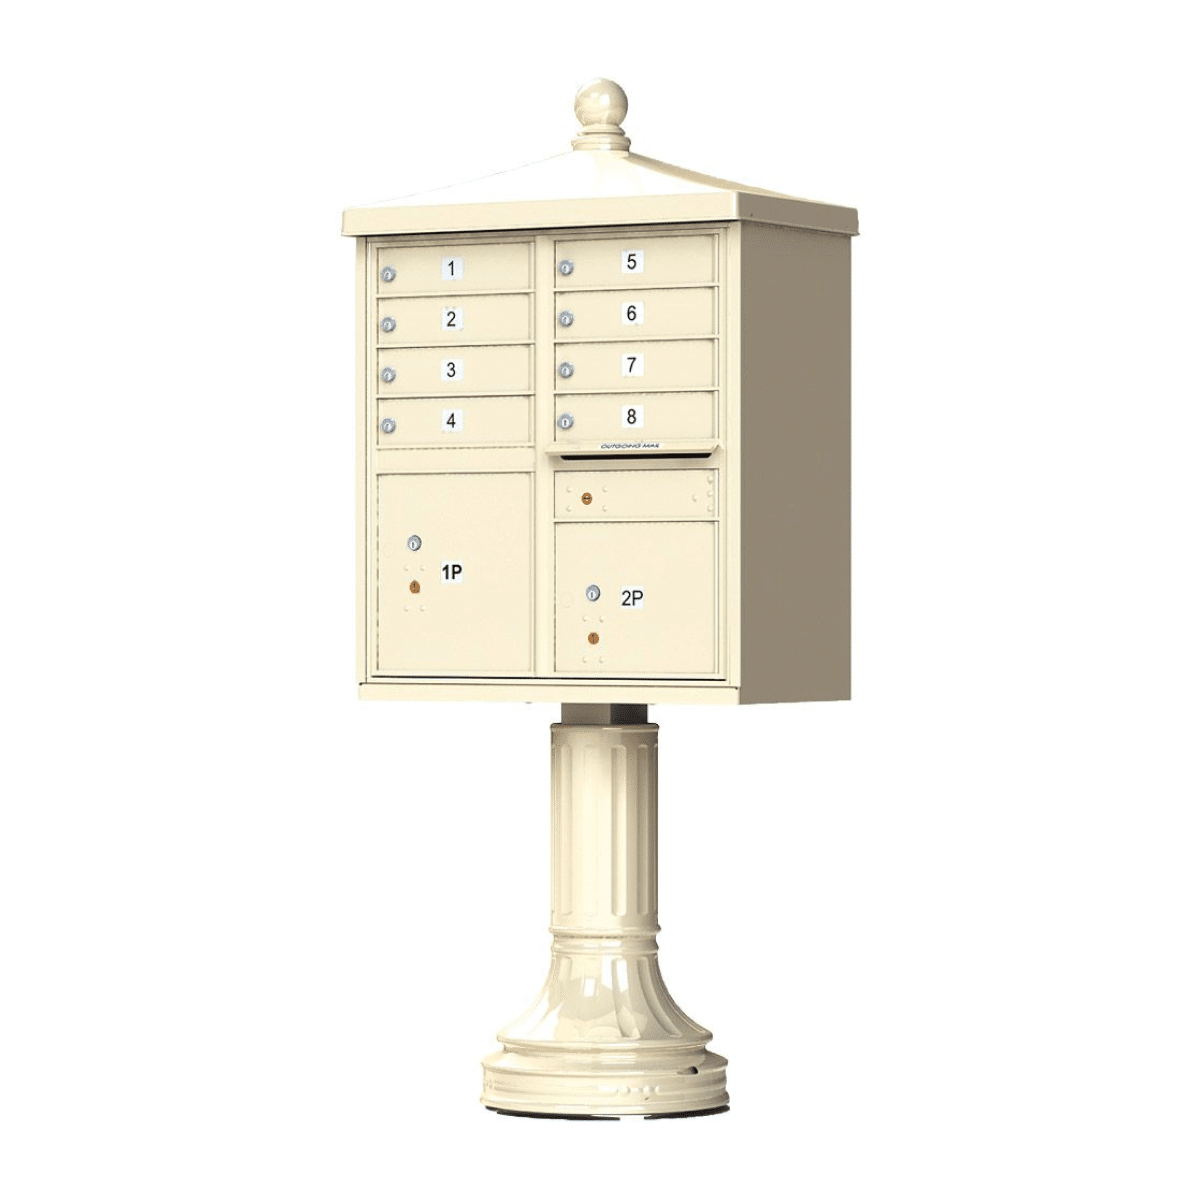 Florence CBU Cluster Mailbox – Vogue Traditional Kit, 8 Tenant Doors, 2 Parcel Lockers Product Image